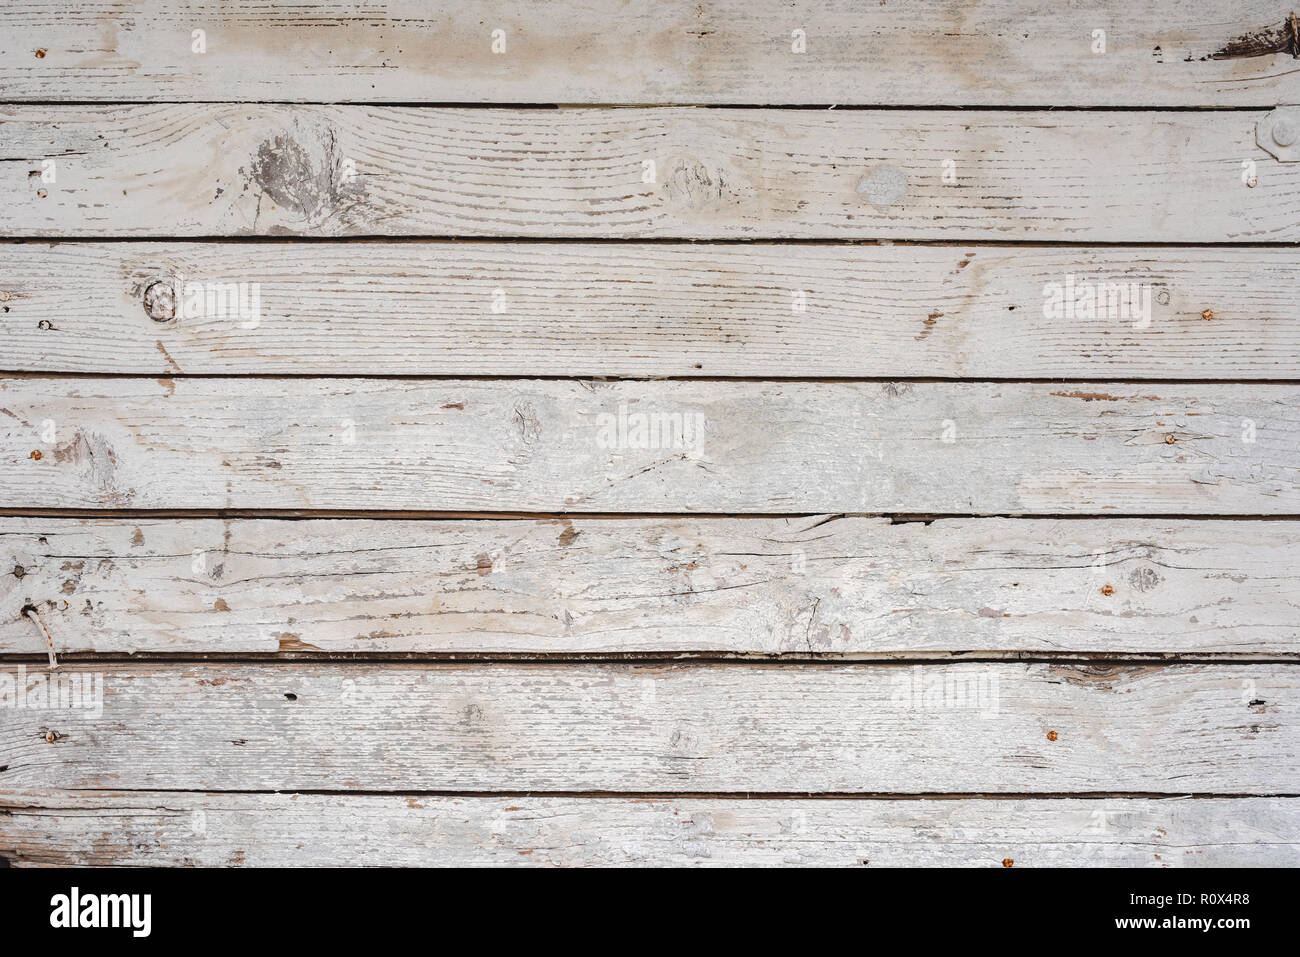 White wood texture for background. Grunge background. Peeling paint on an  old wooden floor. Stock Photo